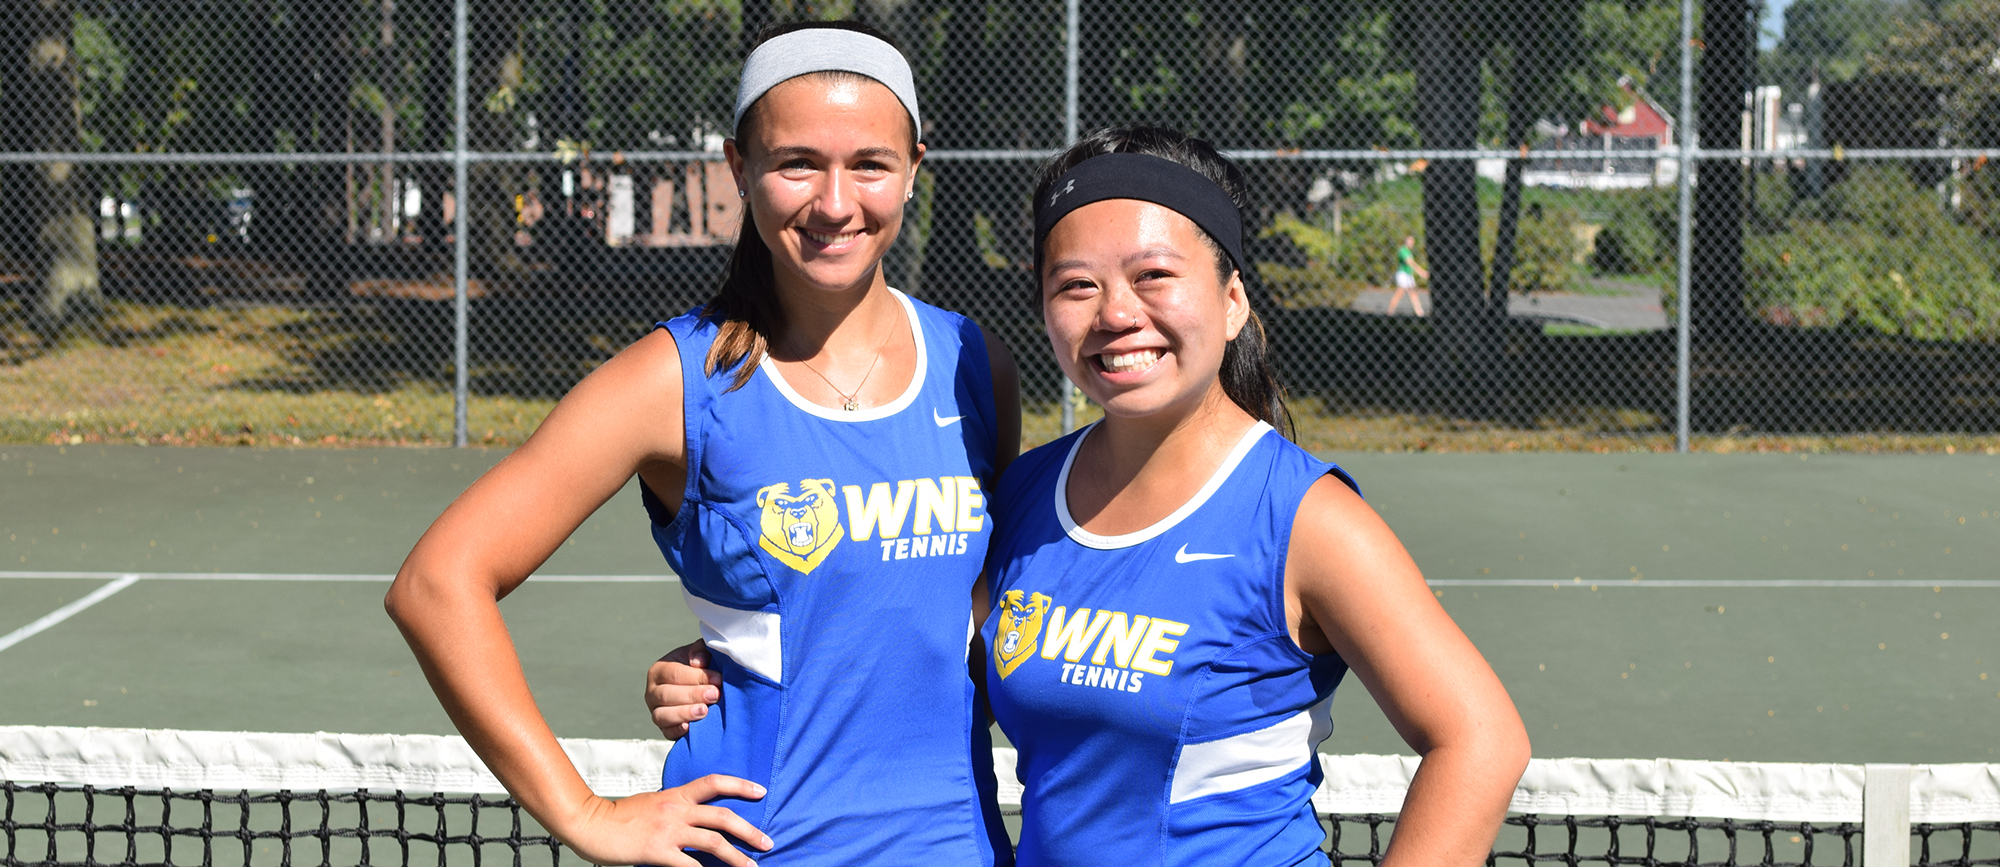 Seniors Christina D'Agostino (left) and Kim Phu (right) were honored prior to the start of Sunday's match, which the Golden Bears won 9-0.